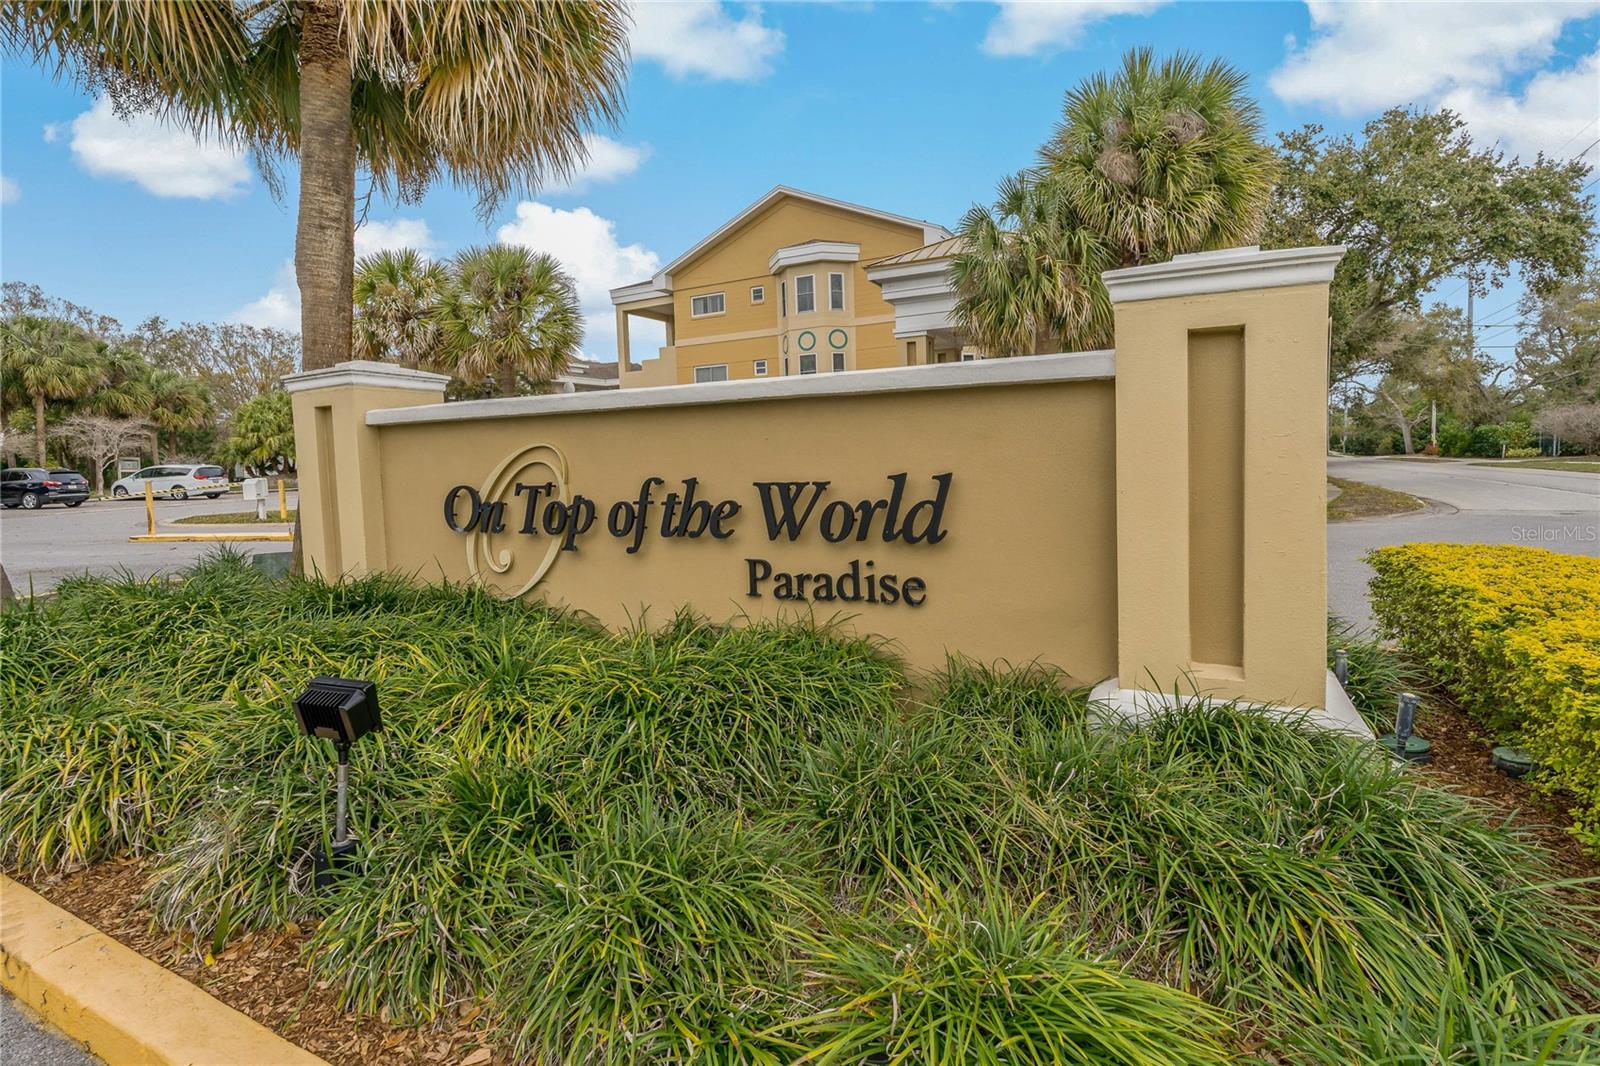 WELCOME TO THE EXCLUSIVE & PRIVATE GATED COMMUNITY OF PARADISE IN ON TOP OF THE WORLD!